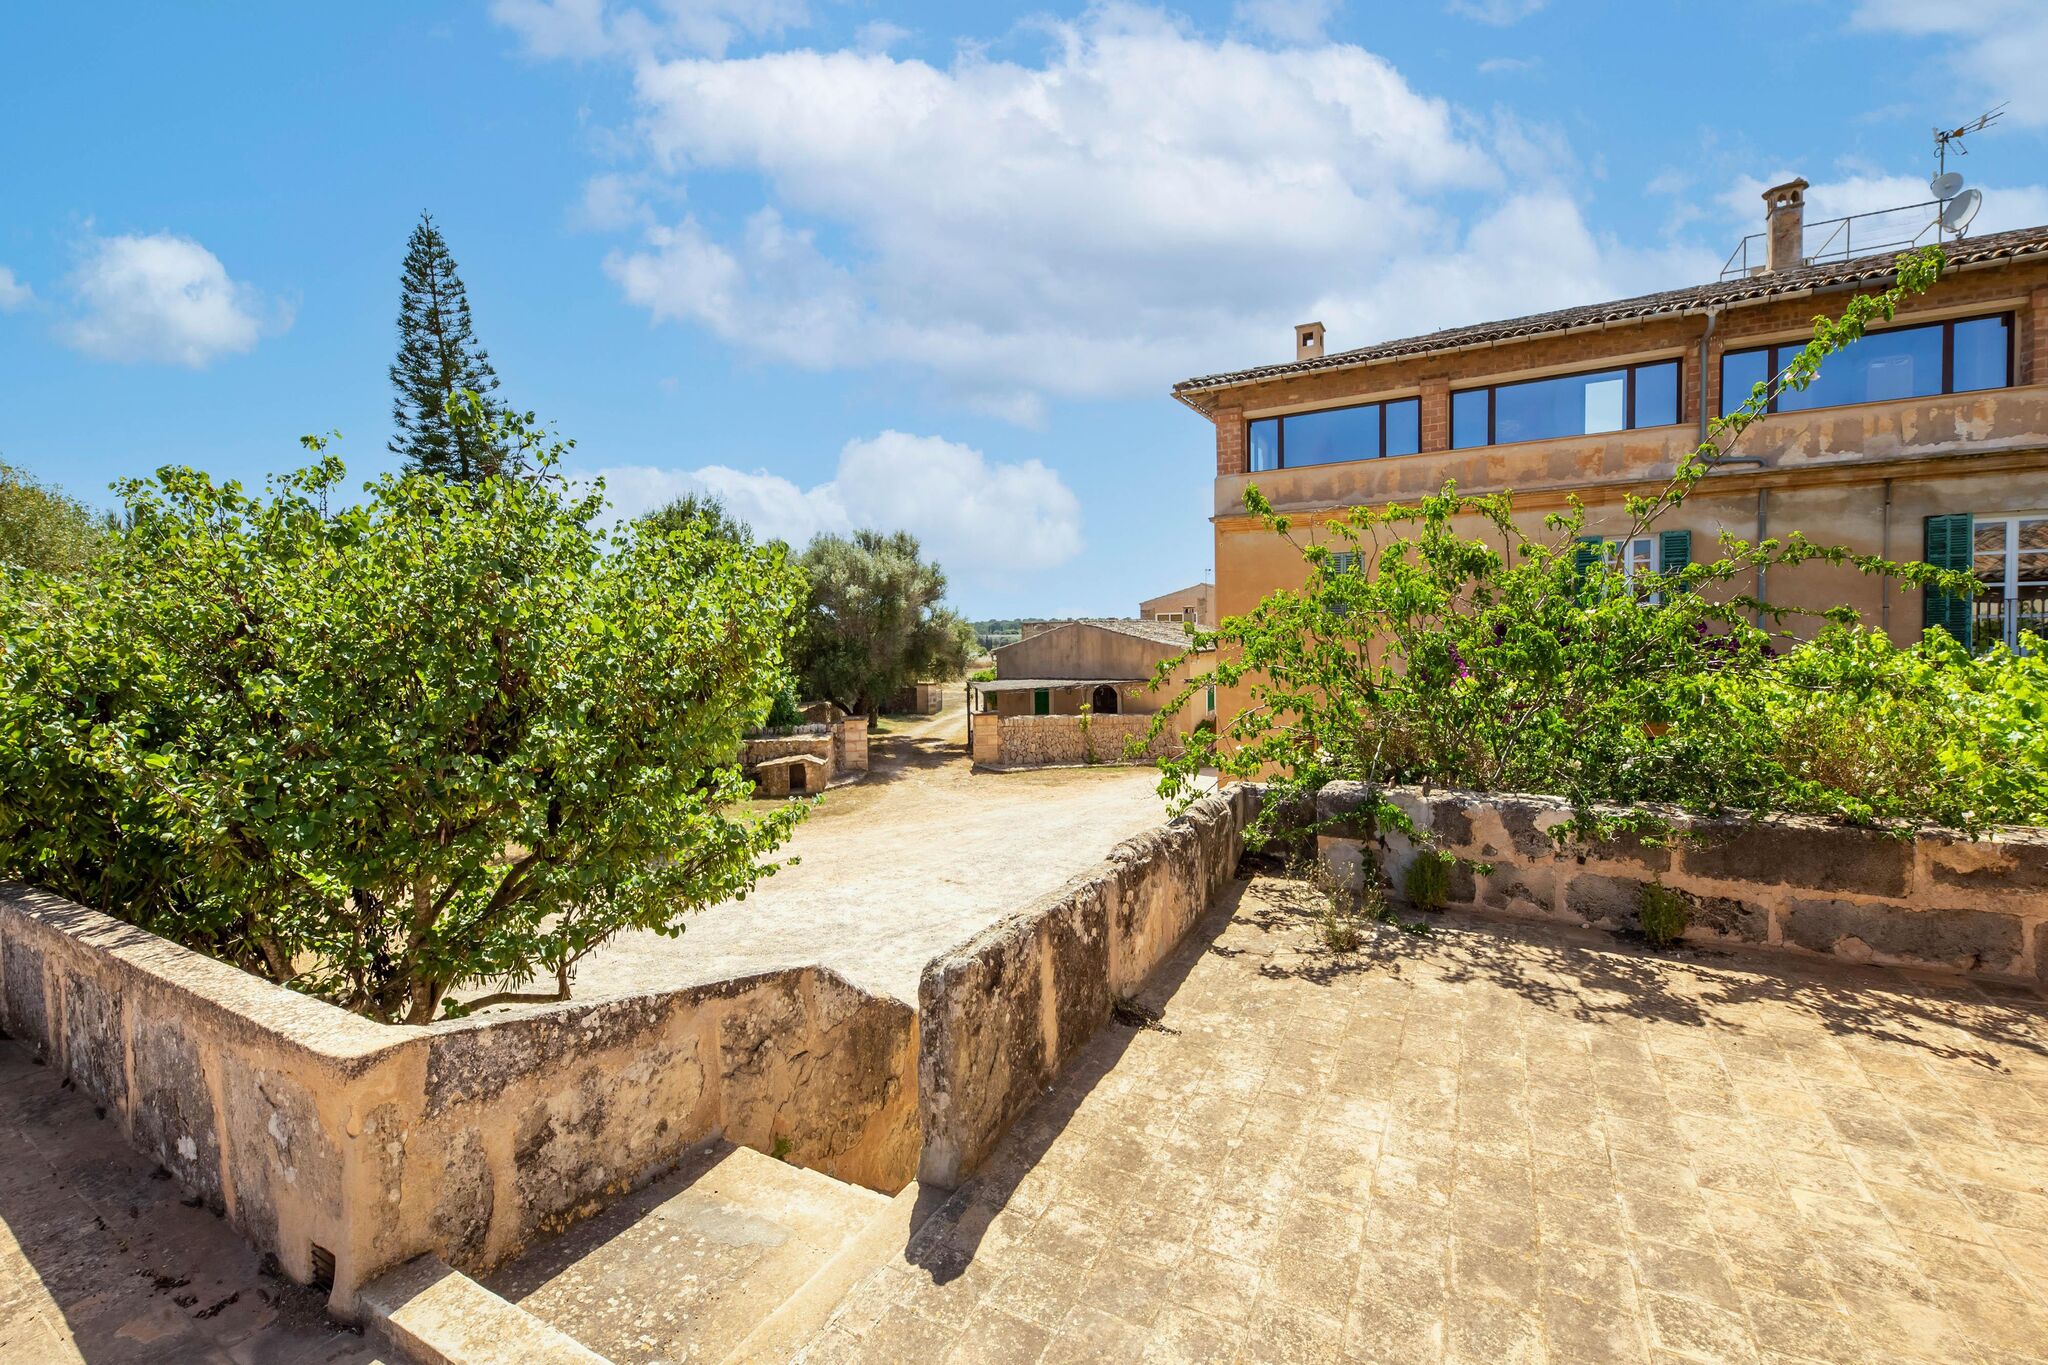 Duplex on estate with private access to the most beautiful beach in Mallorca